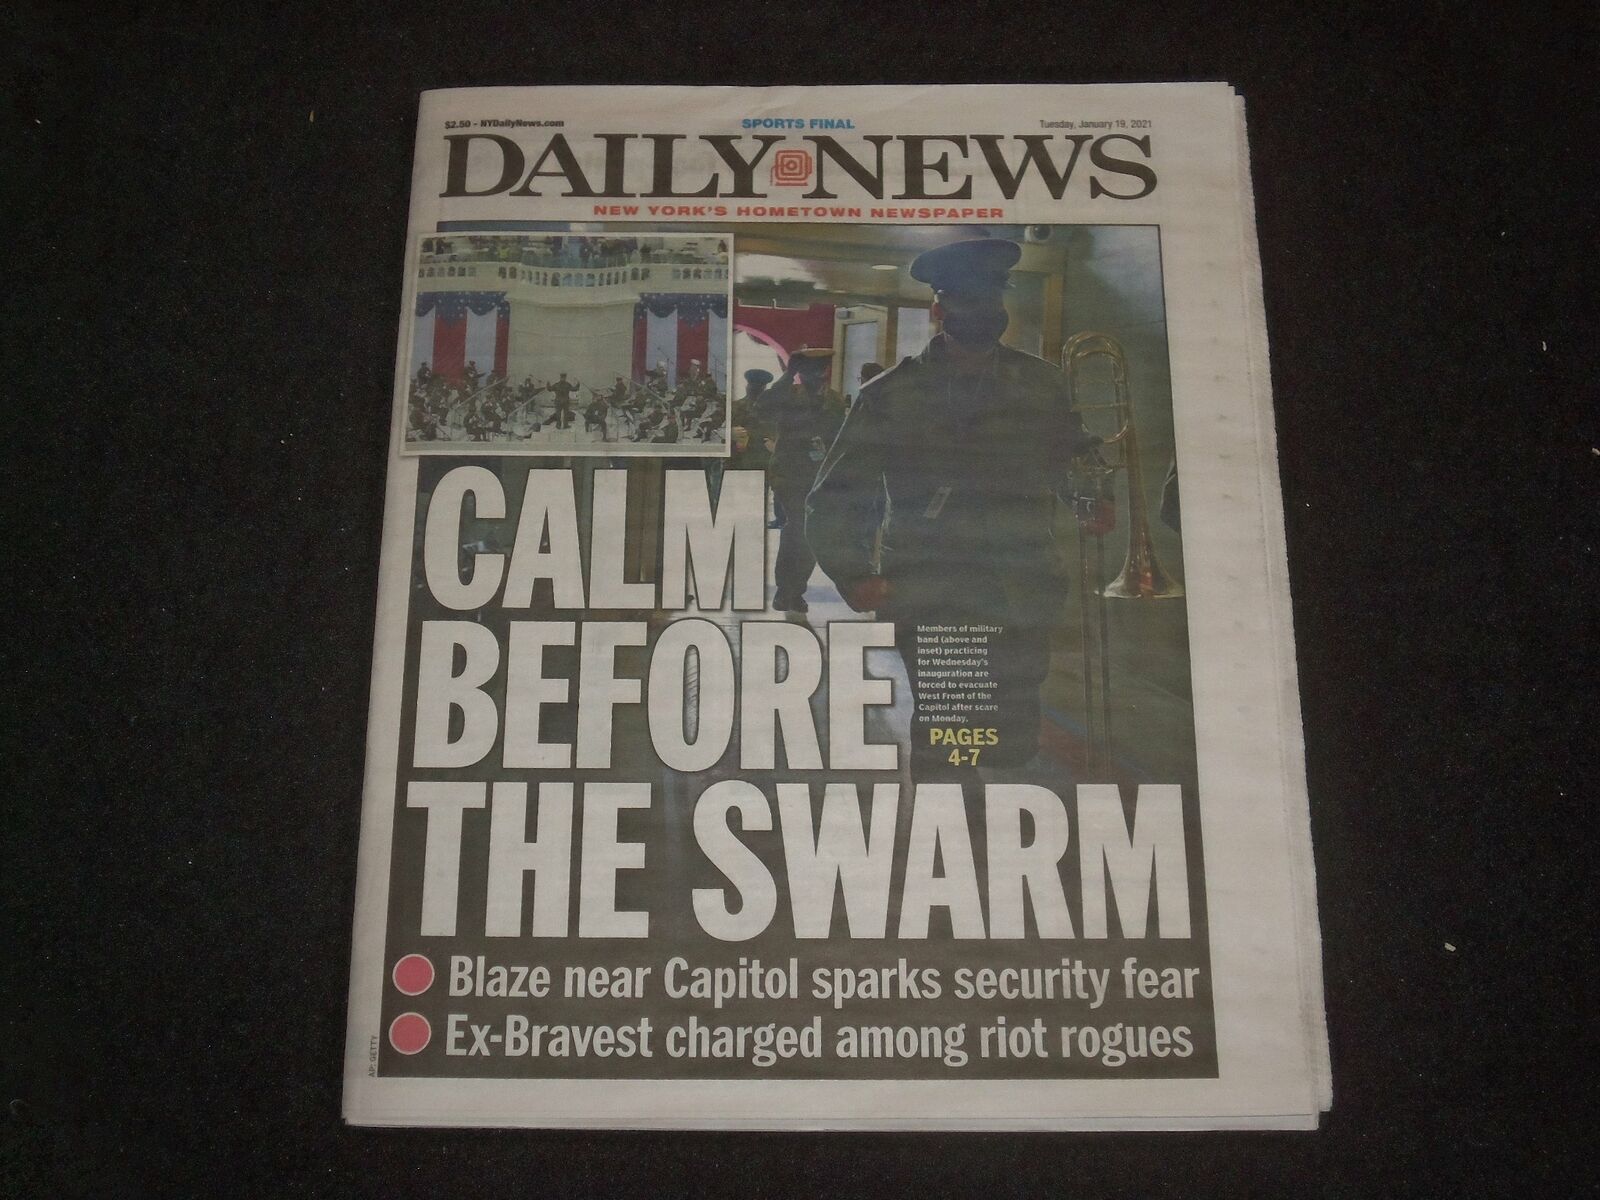 2021 JANUARY 19 NEW YORK DAILY NEWS NEWSPAPER - CALM BEFORE THE SWARM